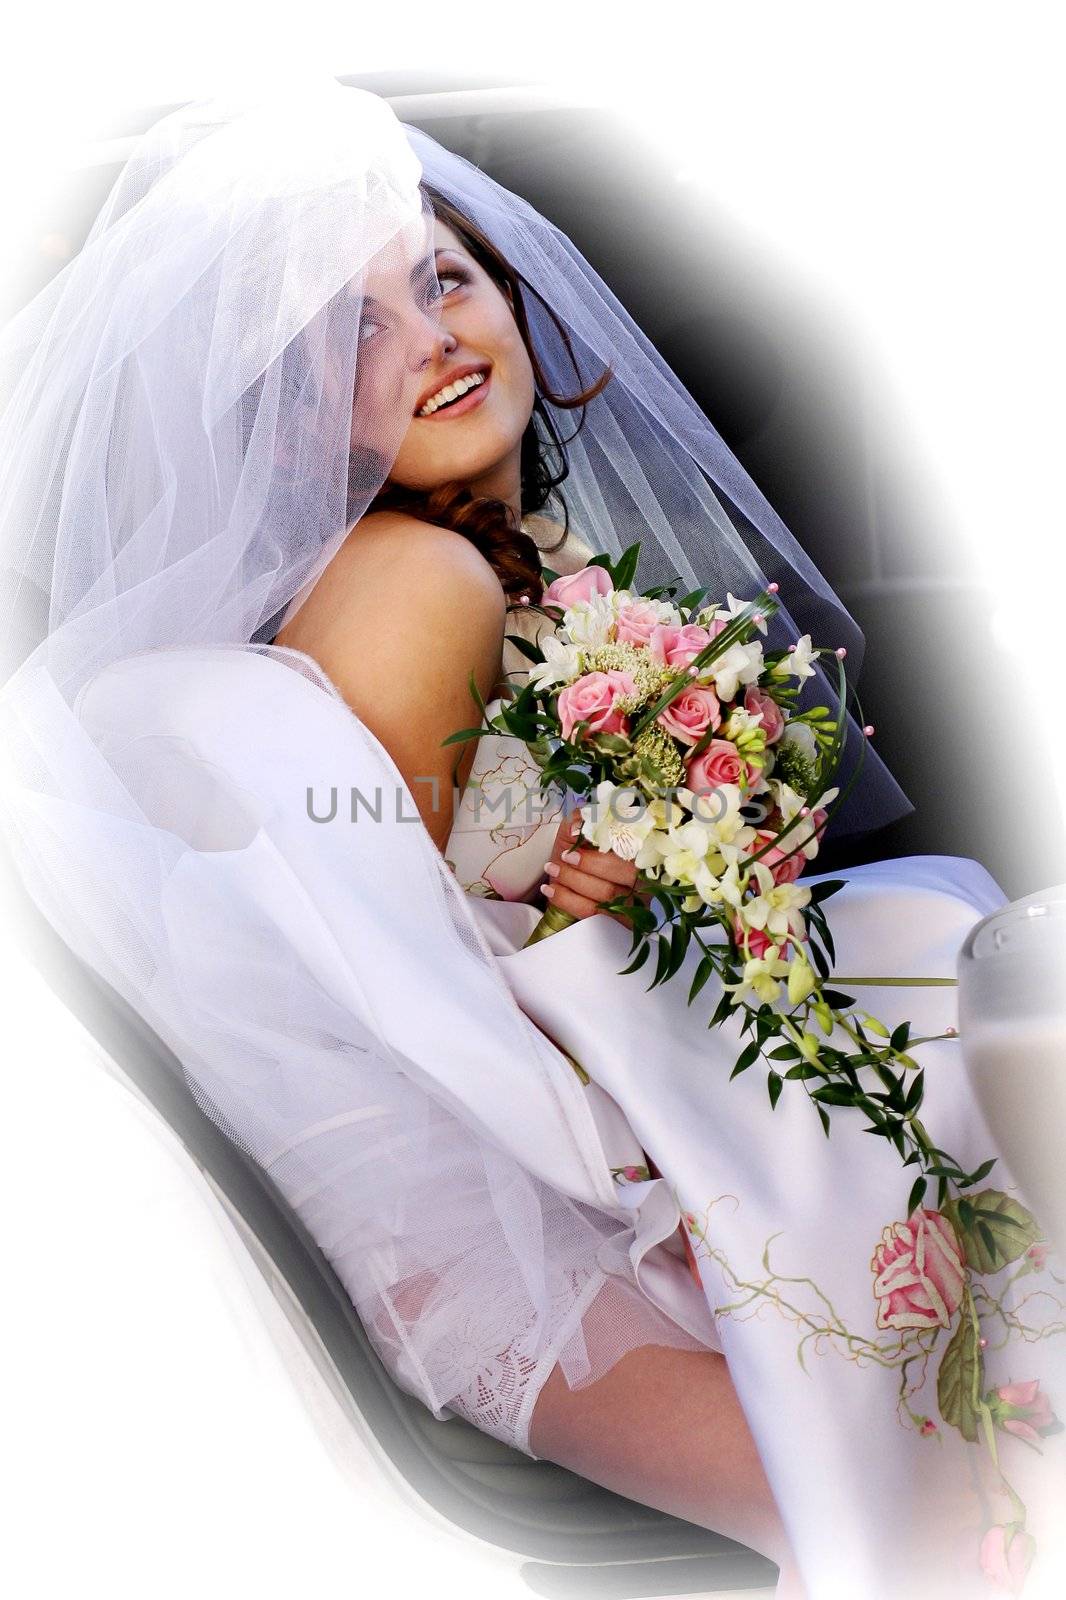 Smiling bride holding bouquet of flowers in wedding car limousine.